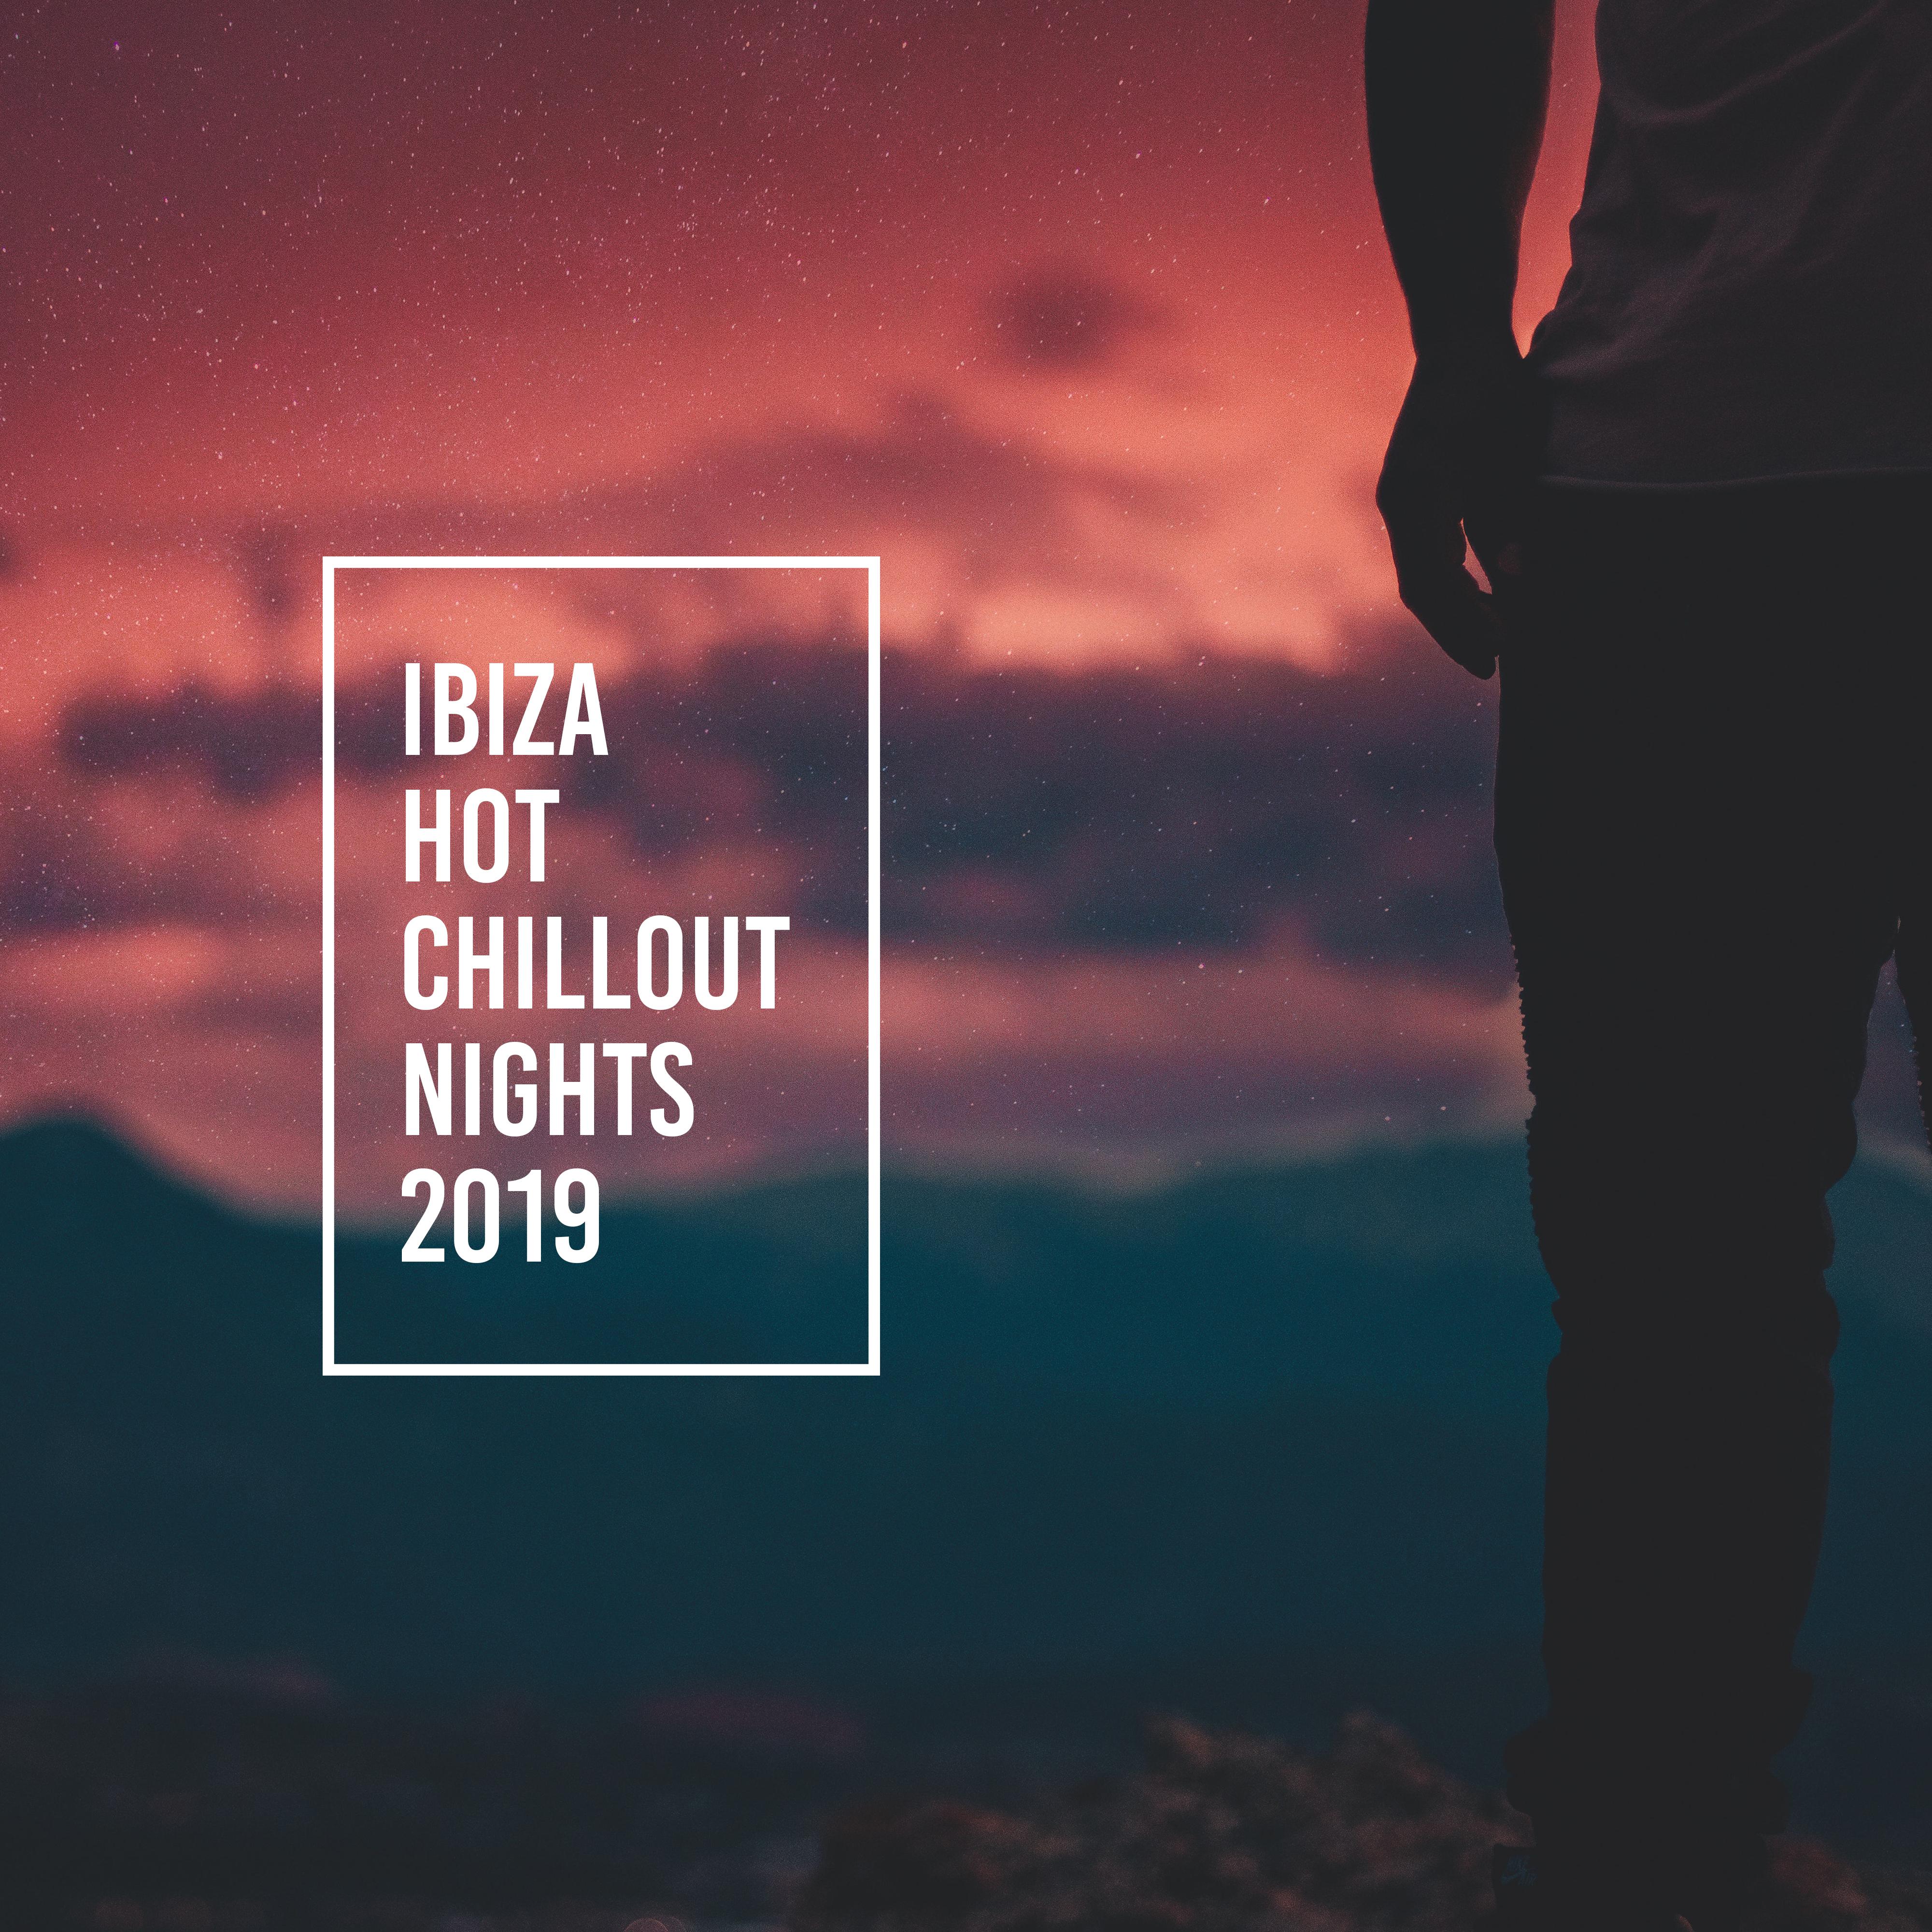 Ibiza Hot Chillout Nights 2019  Top Chill Out Music Compilation, Summer Holiday Relaxing Vibes, Ultimate Sunset Beach Rest Beats